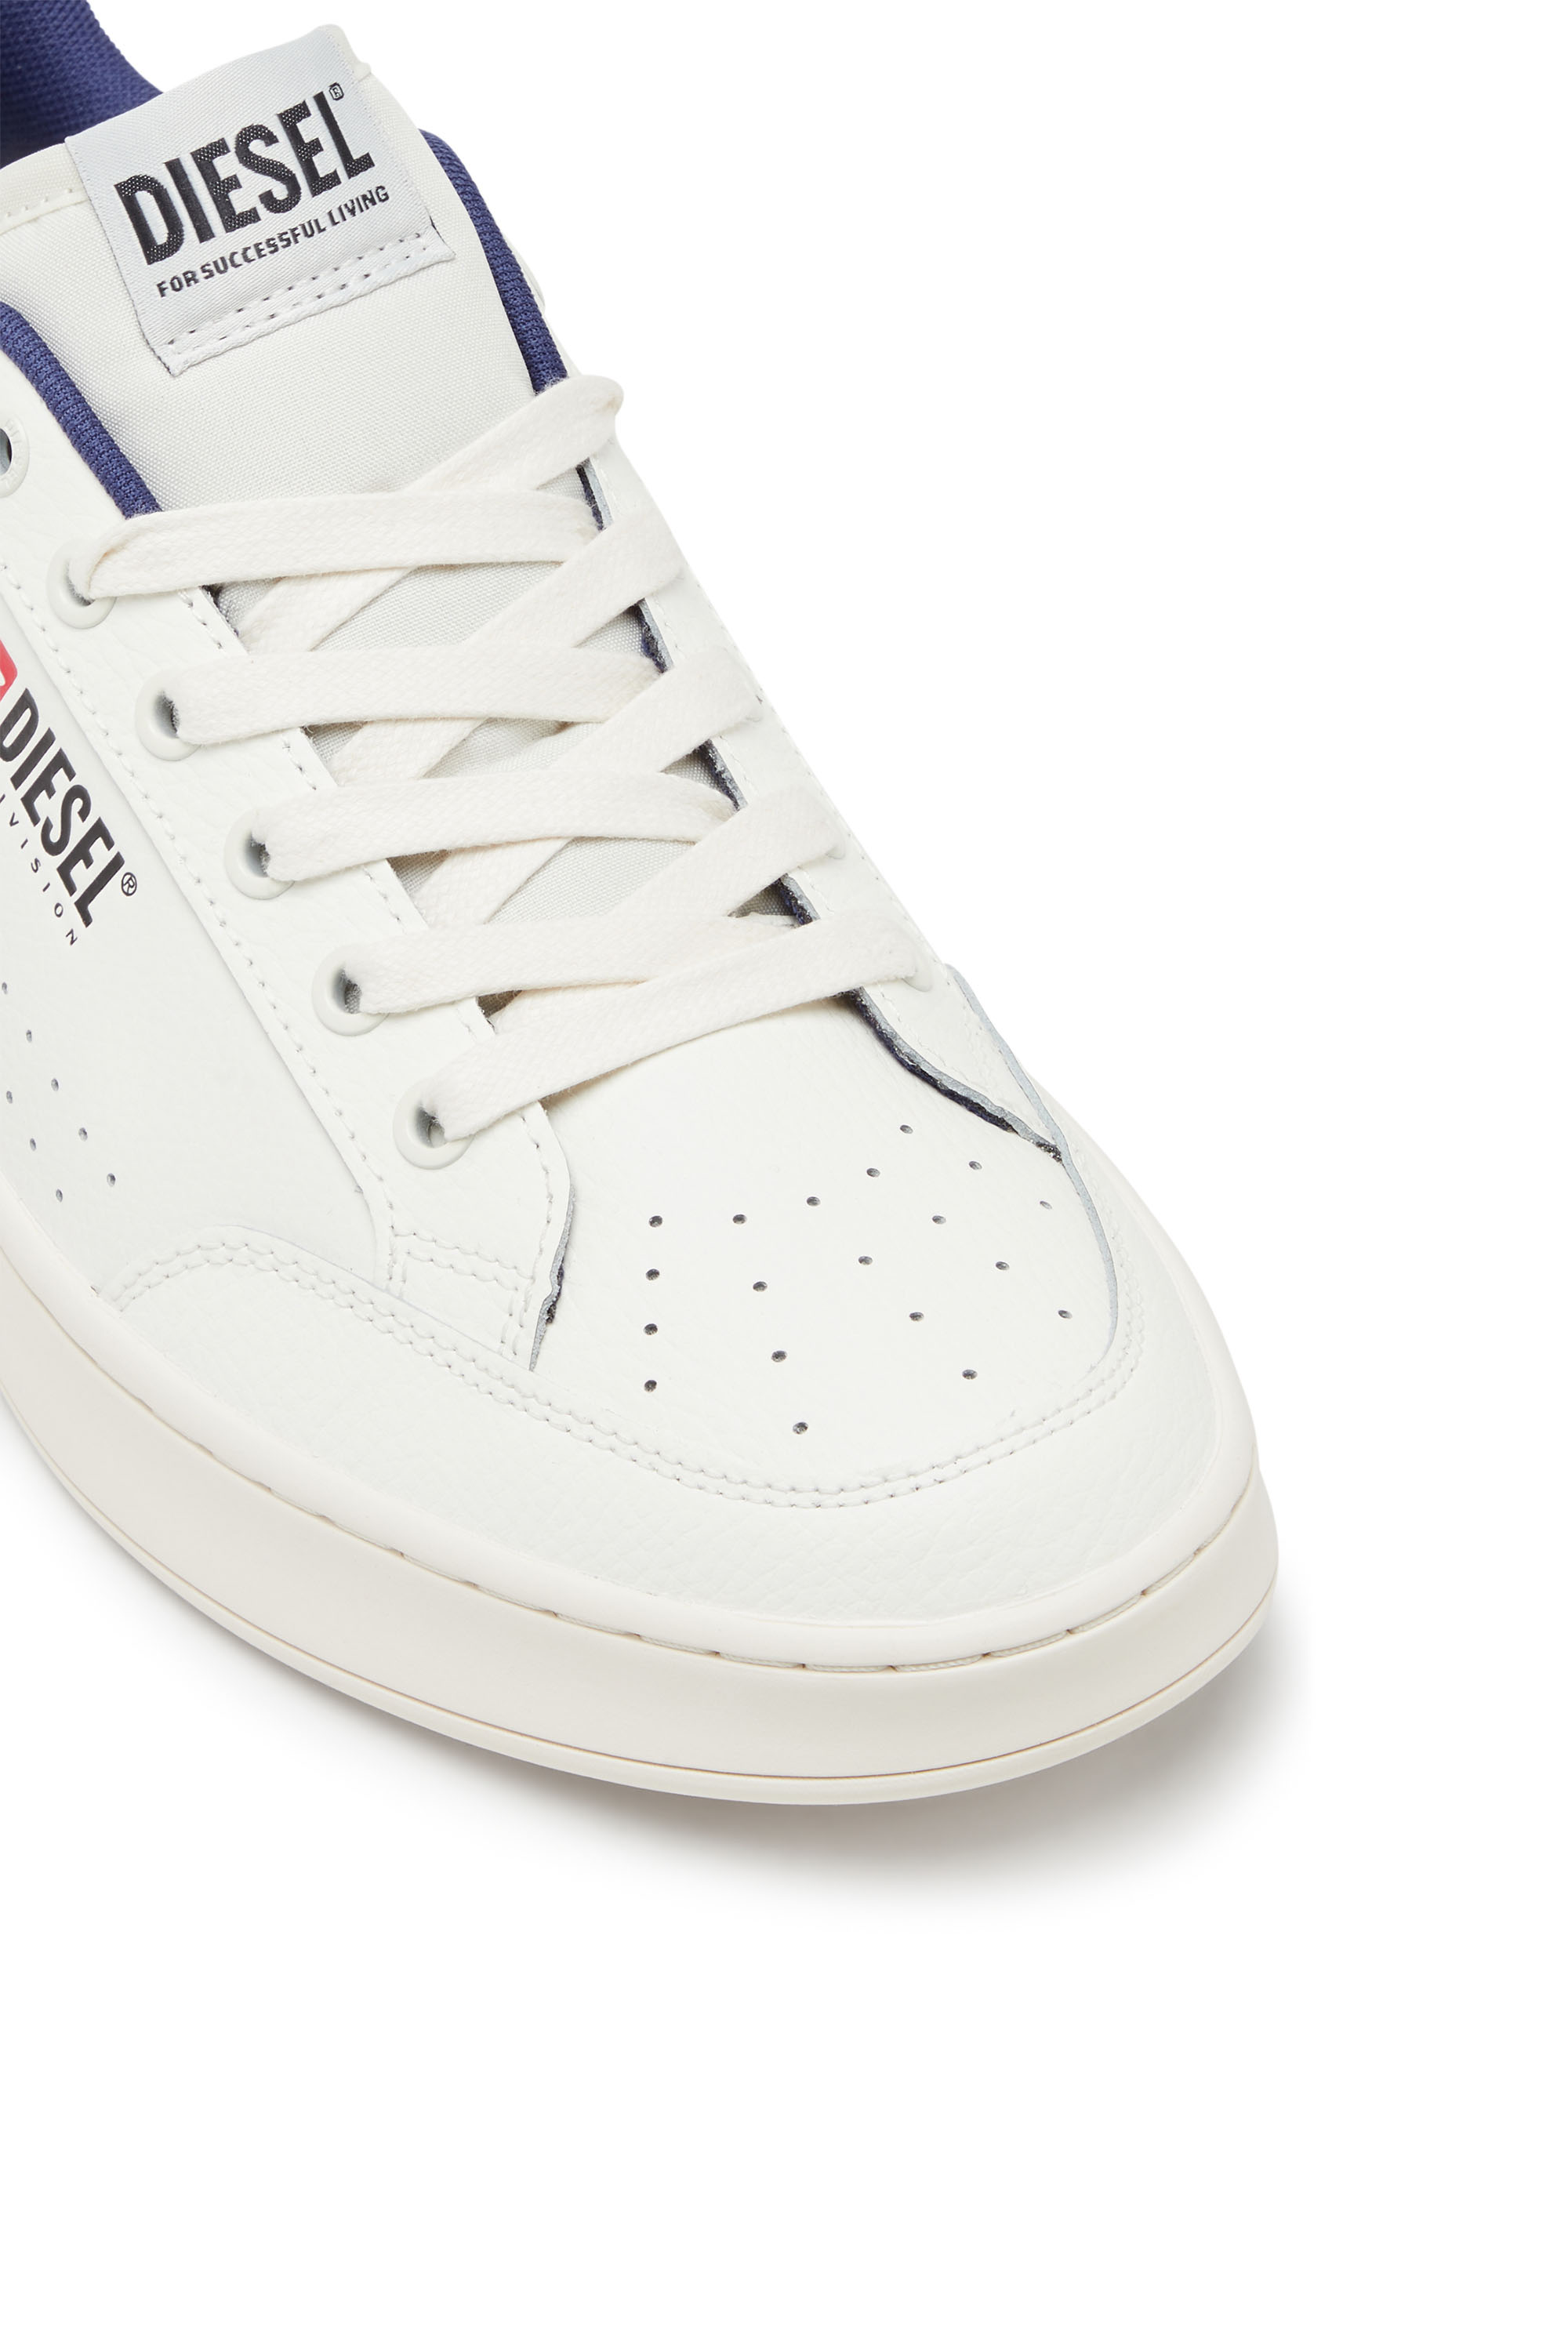 Diesel - S-ATHENE VTG, Man S-Athene-Retro sneakers in perforated leather in Multicolor - Image 6